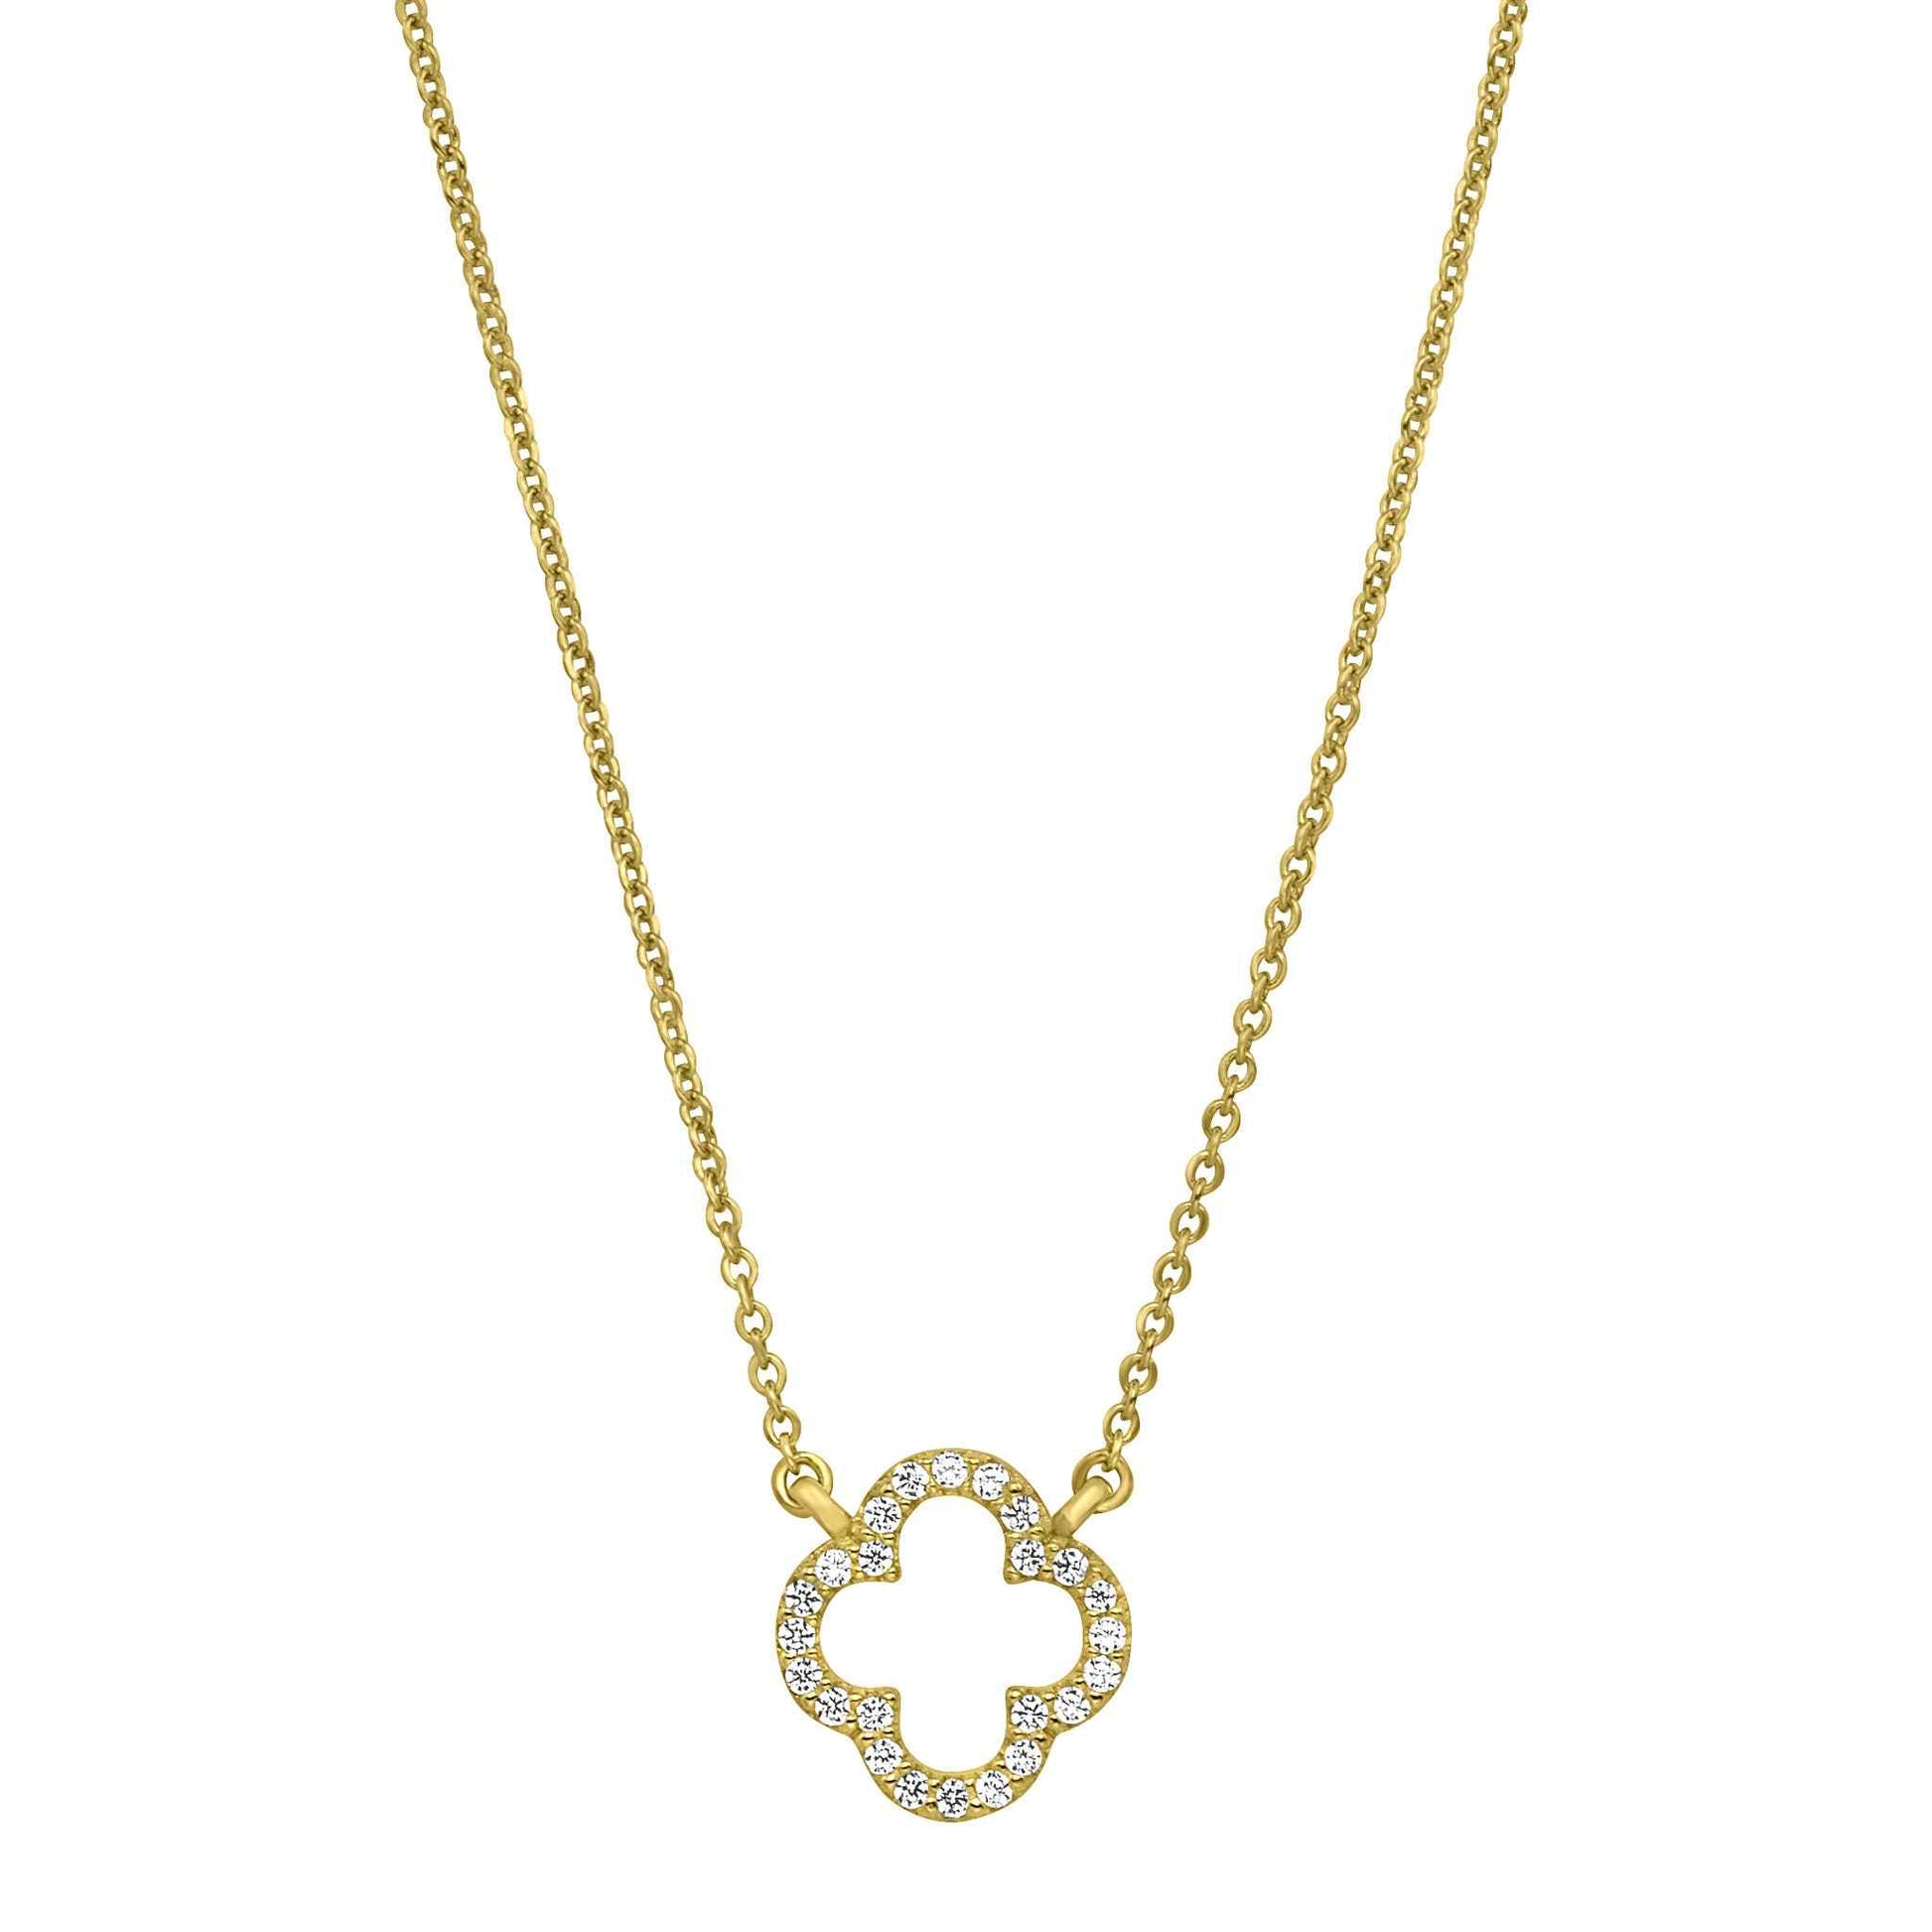 A open clover necklace with simulated diamonds displayed on a neutral white background.